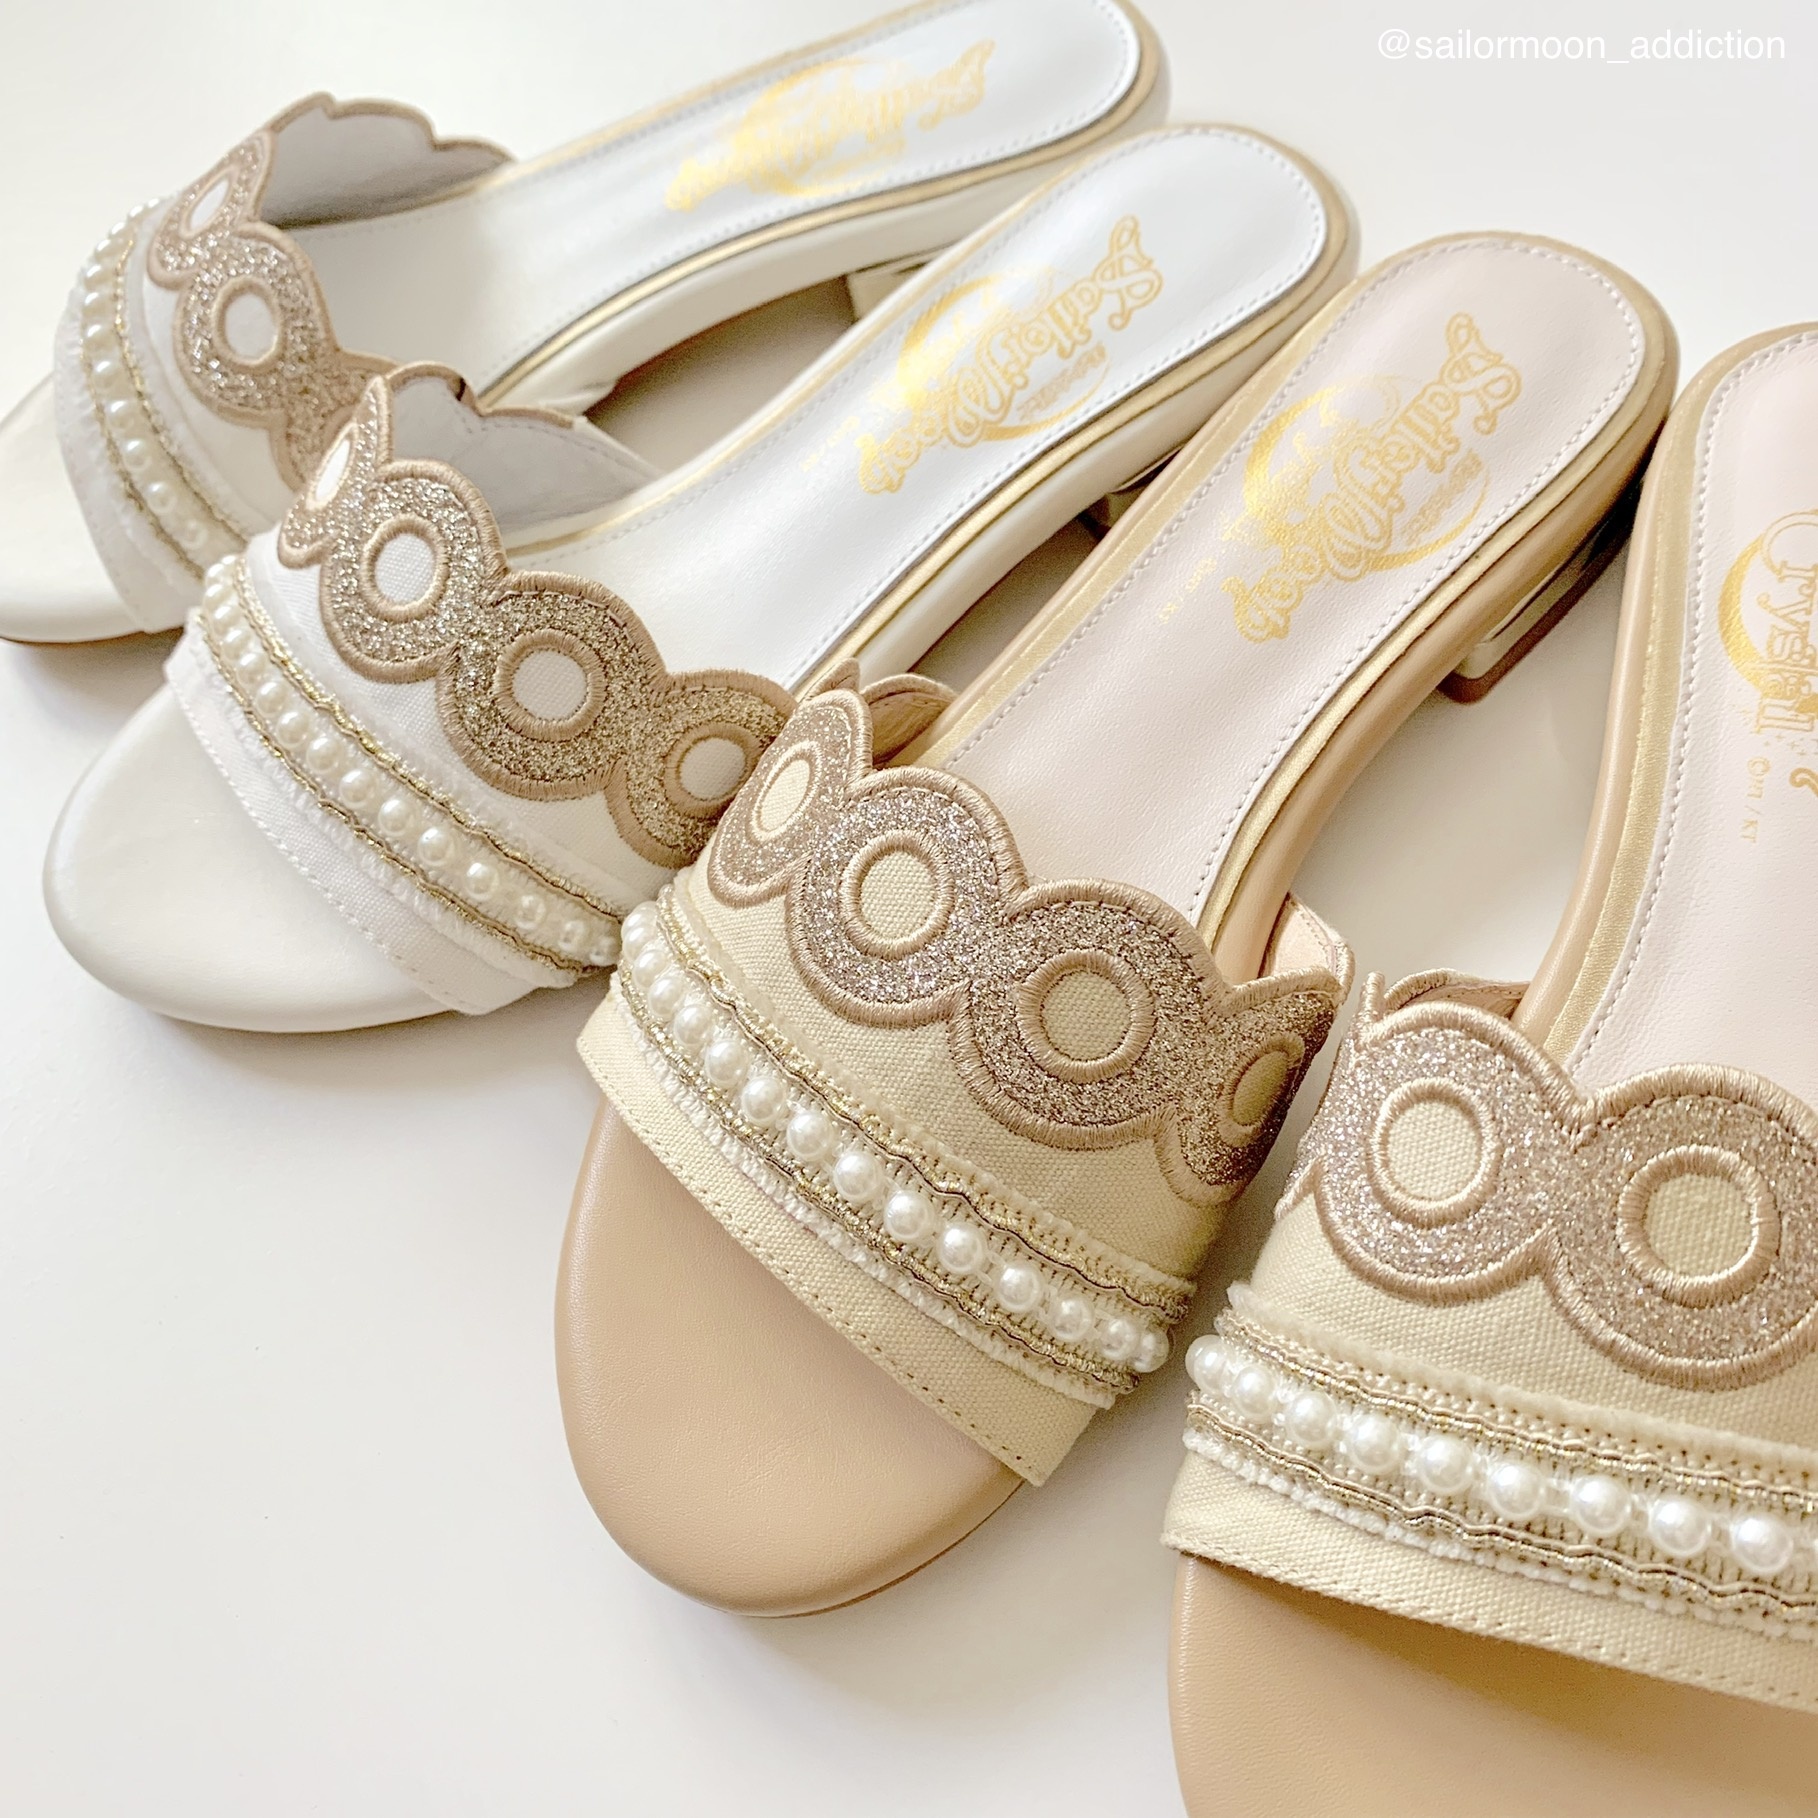 Review - Sailor Moon x Grace Gift Princess Serenity Slippers White & Champagne